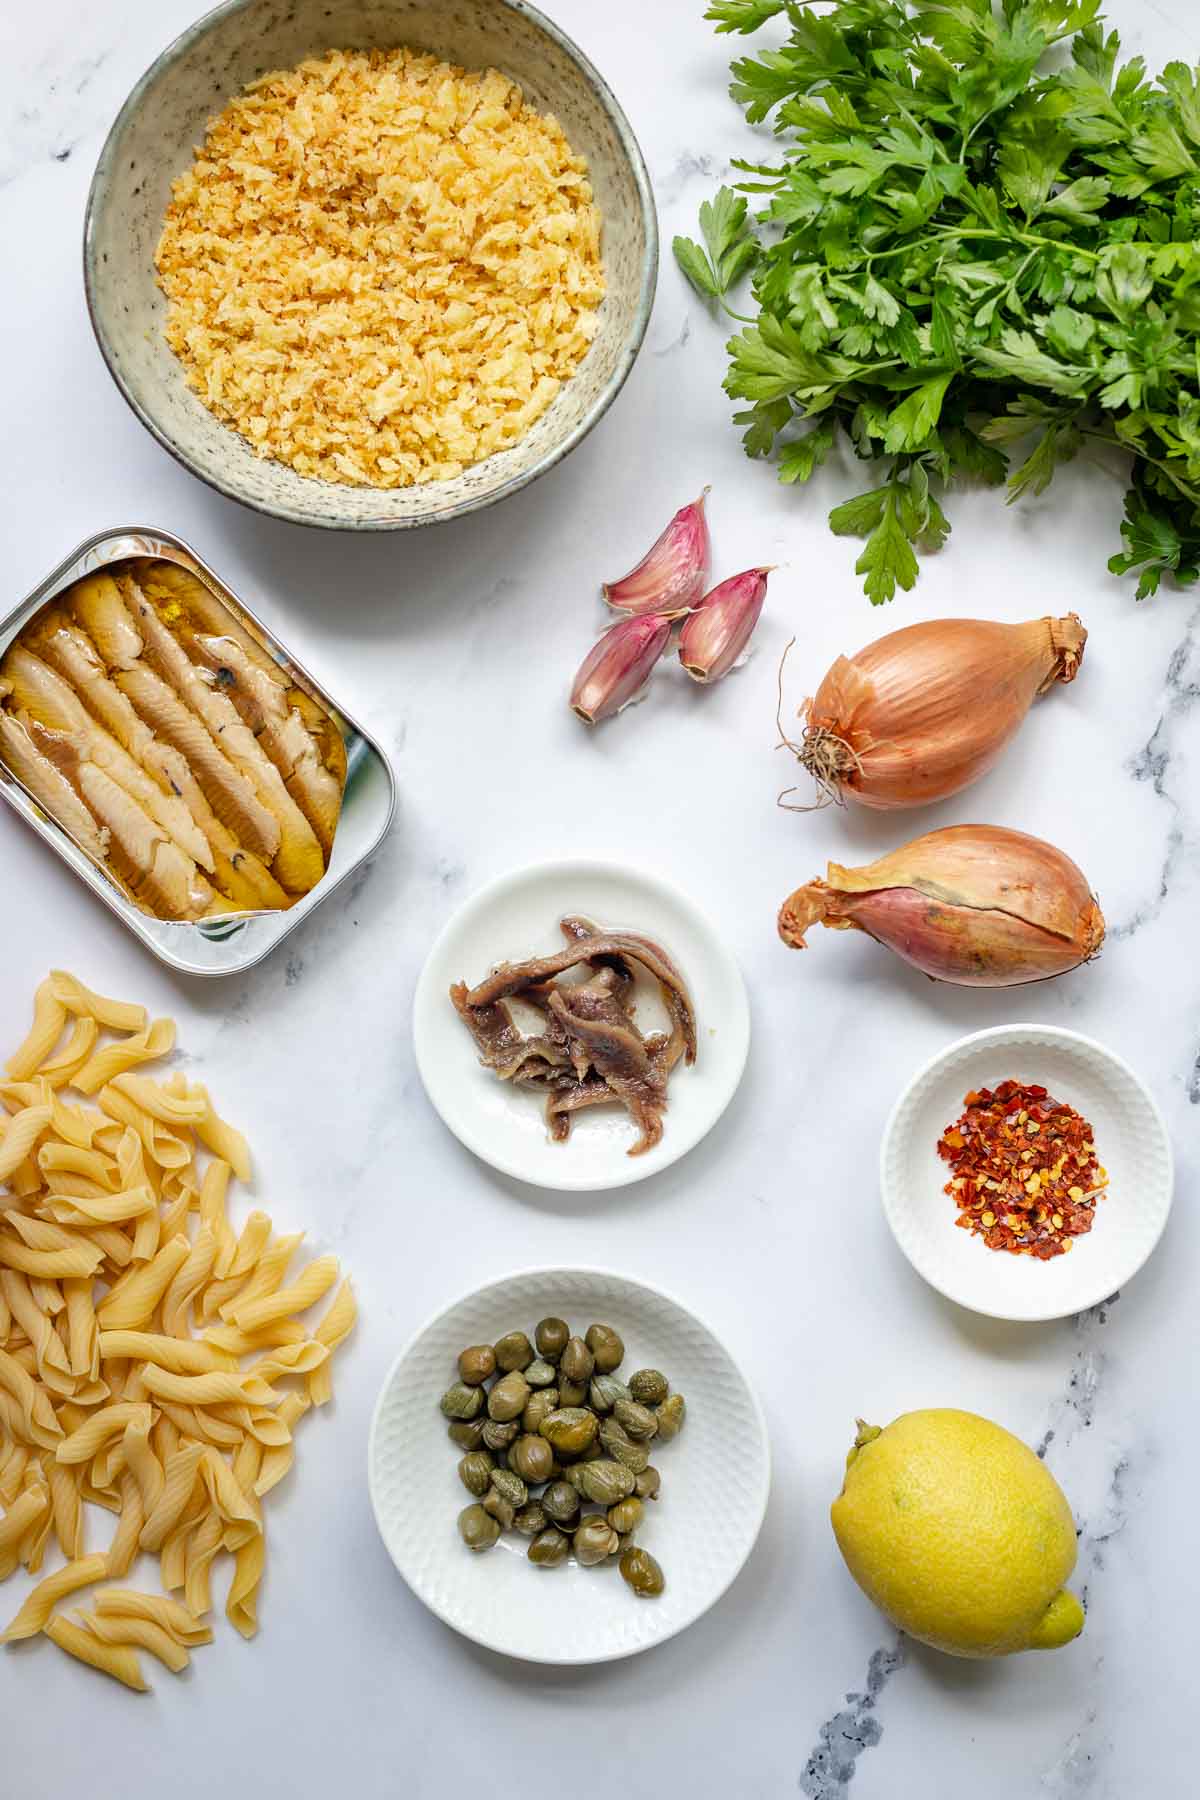 Ingredients for Sicilian Pasta with Sardines, Capers & Breadcrumbs